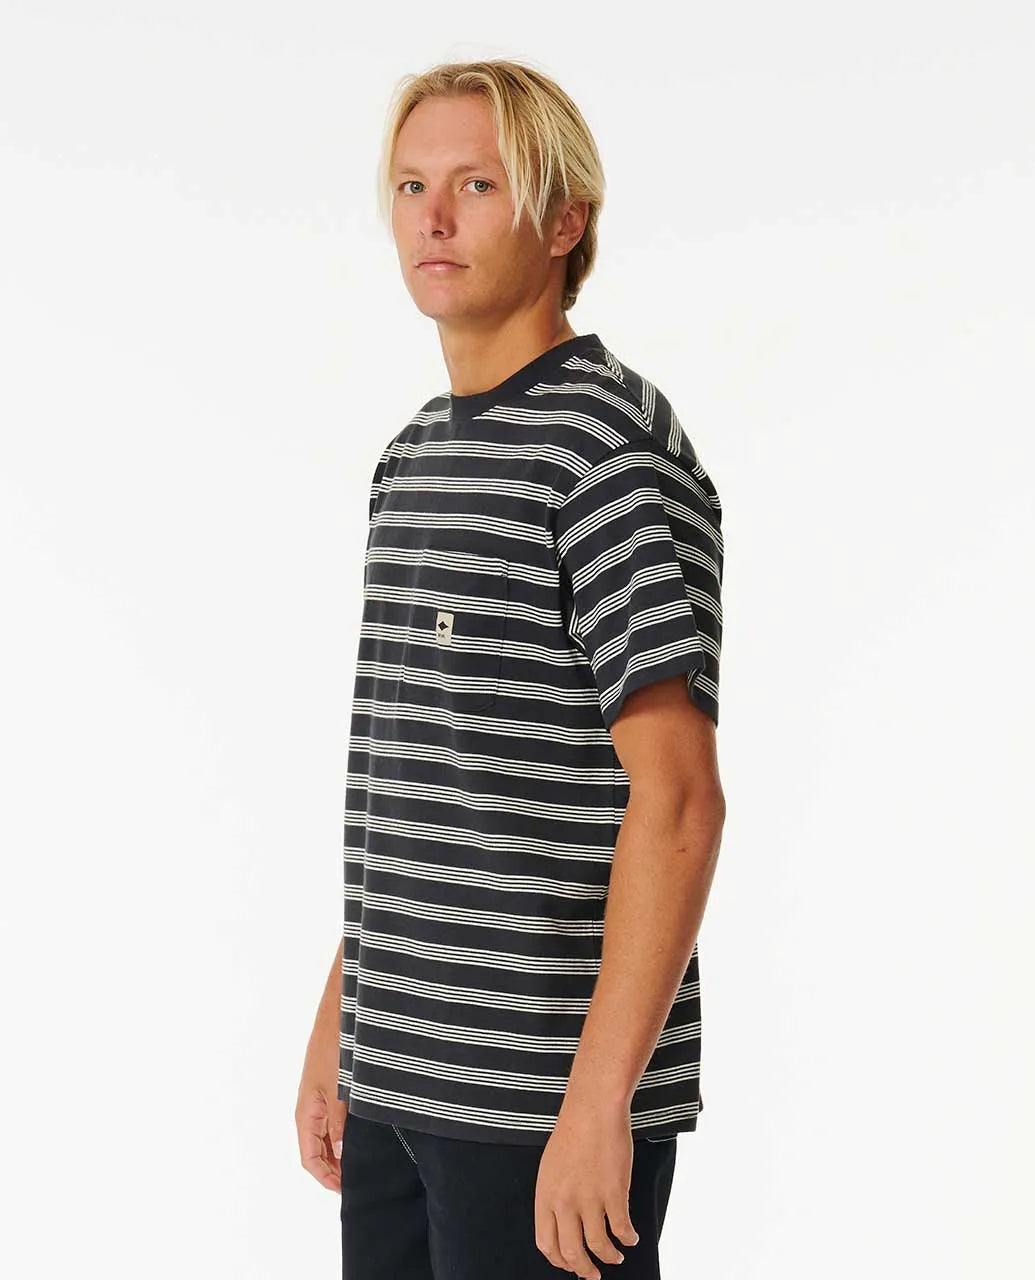 Quality Surf Products Stripe Tee